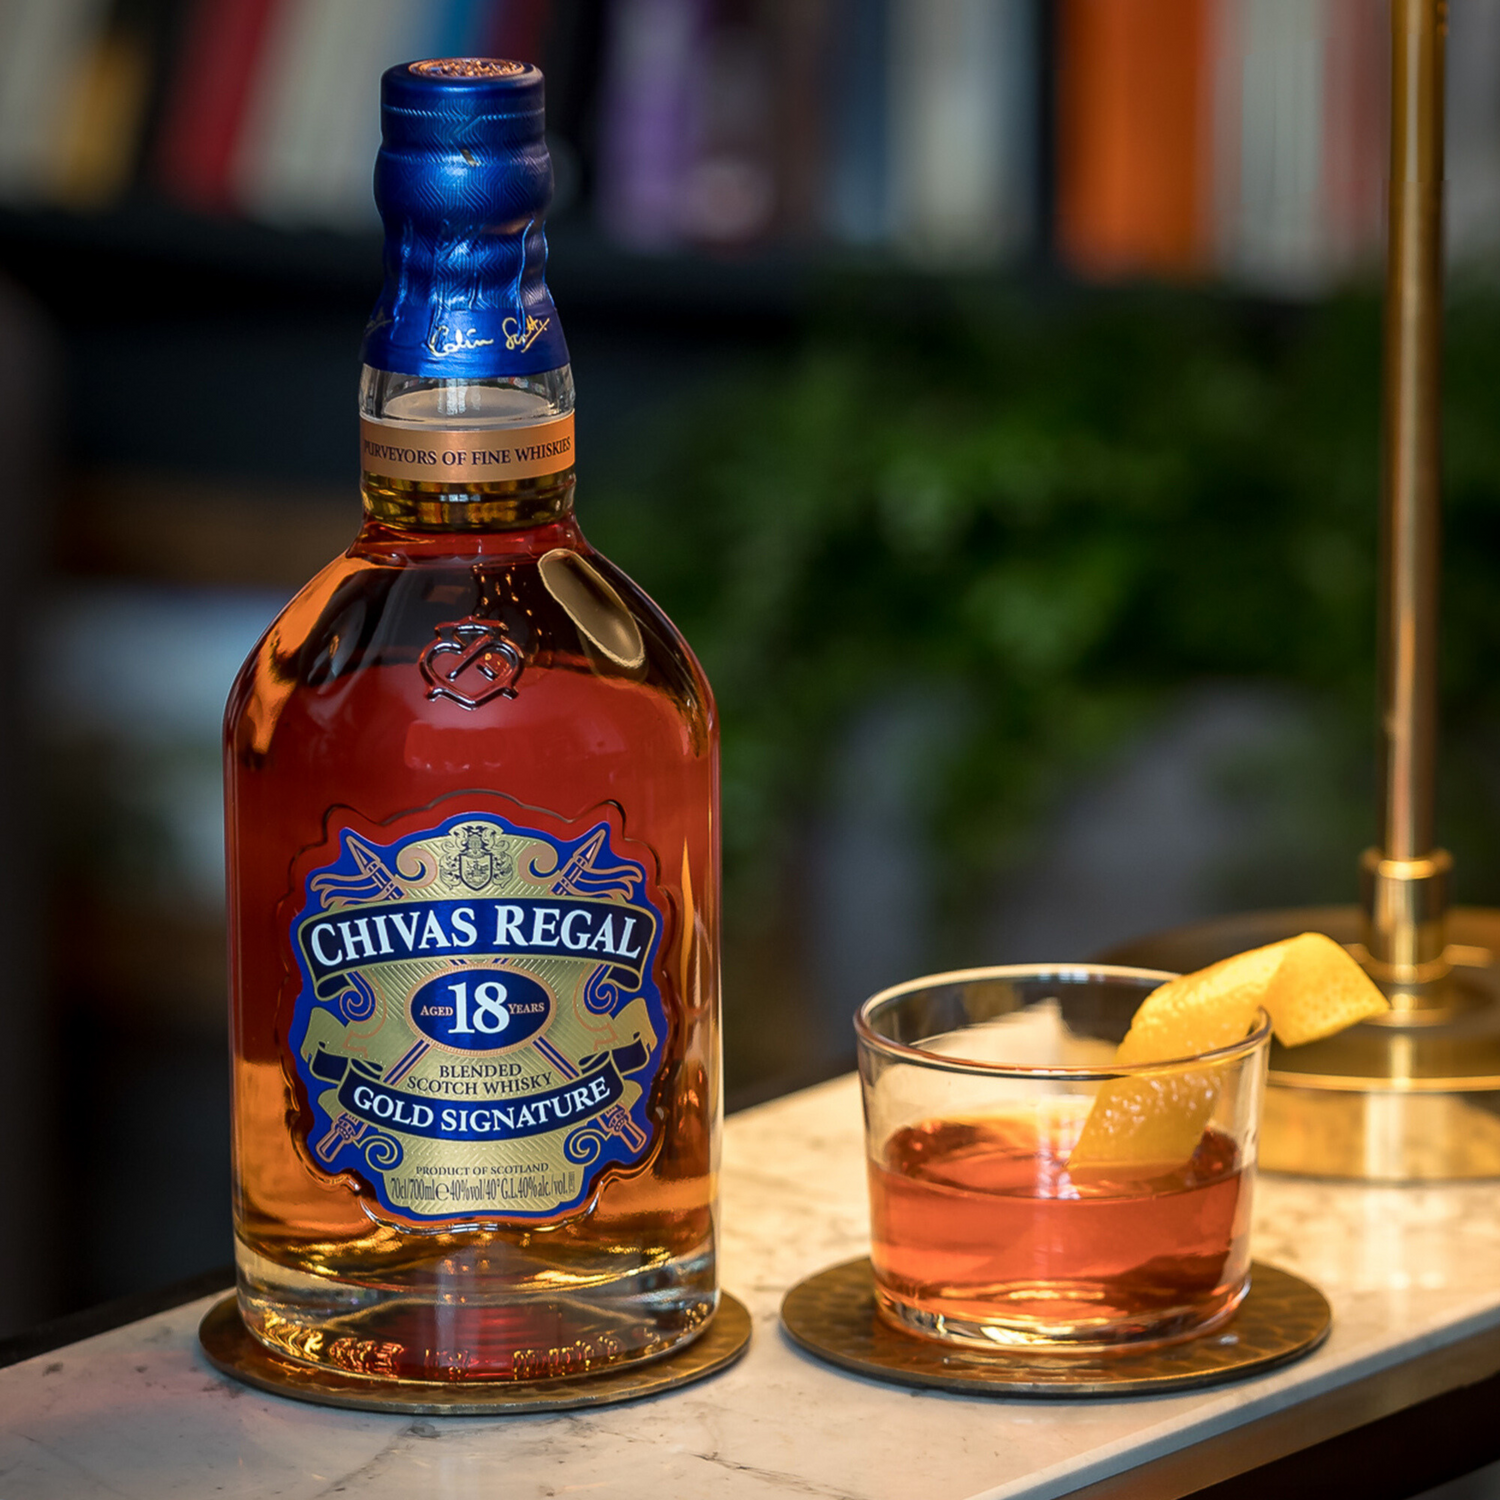 Chivas Regal 18 Years Old Blended Scotch Whisky, 700mL